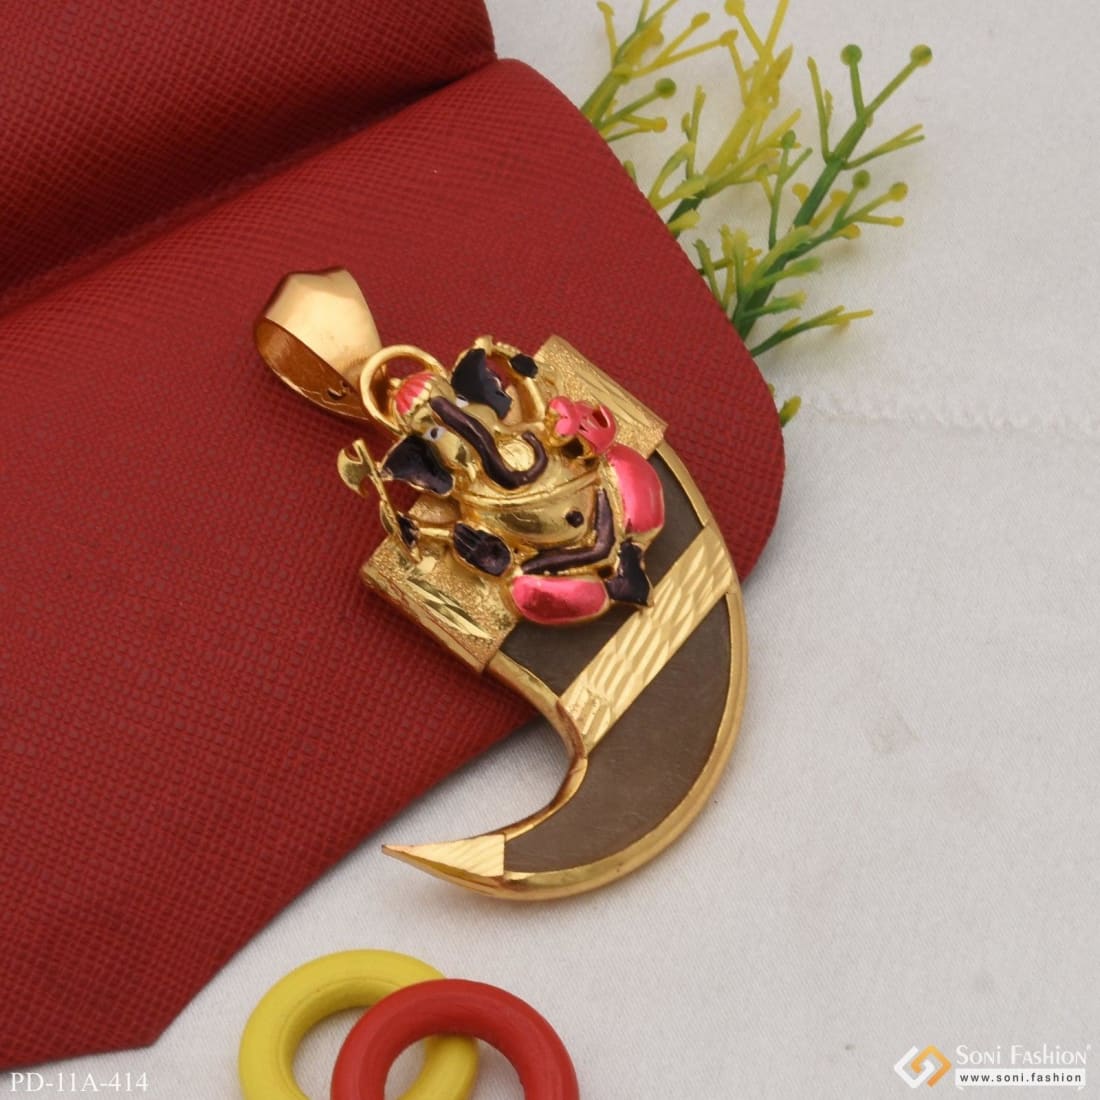 Shree Krishna In Artificial Daul Lion Nail Gold Plated Pendant - Style A823  at Rs 1900.00 | Rajkot| ID: 26009005130